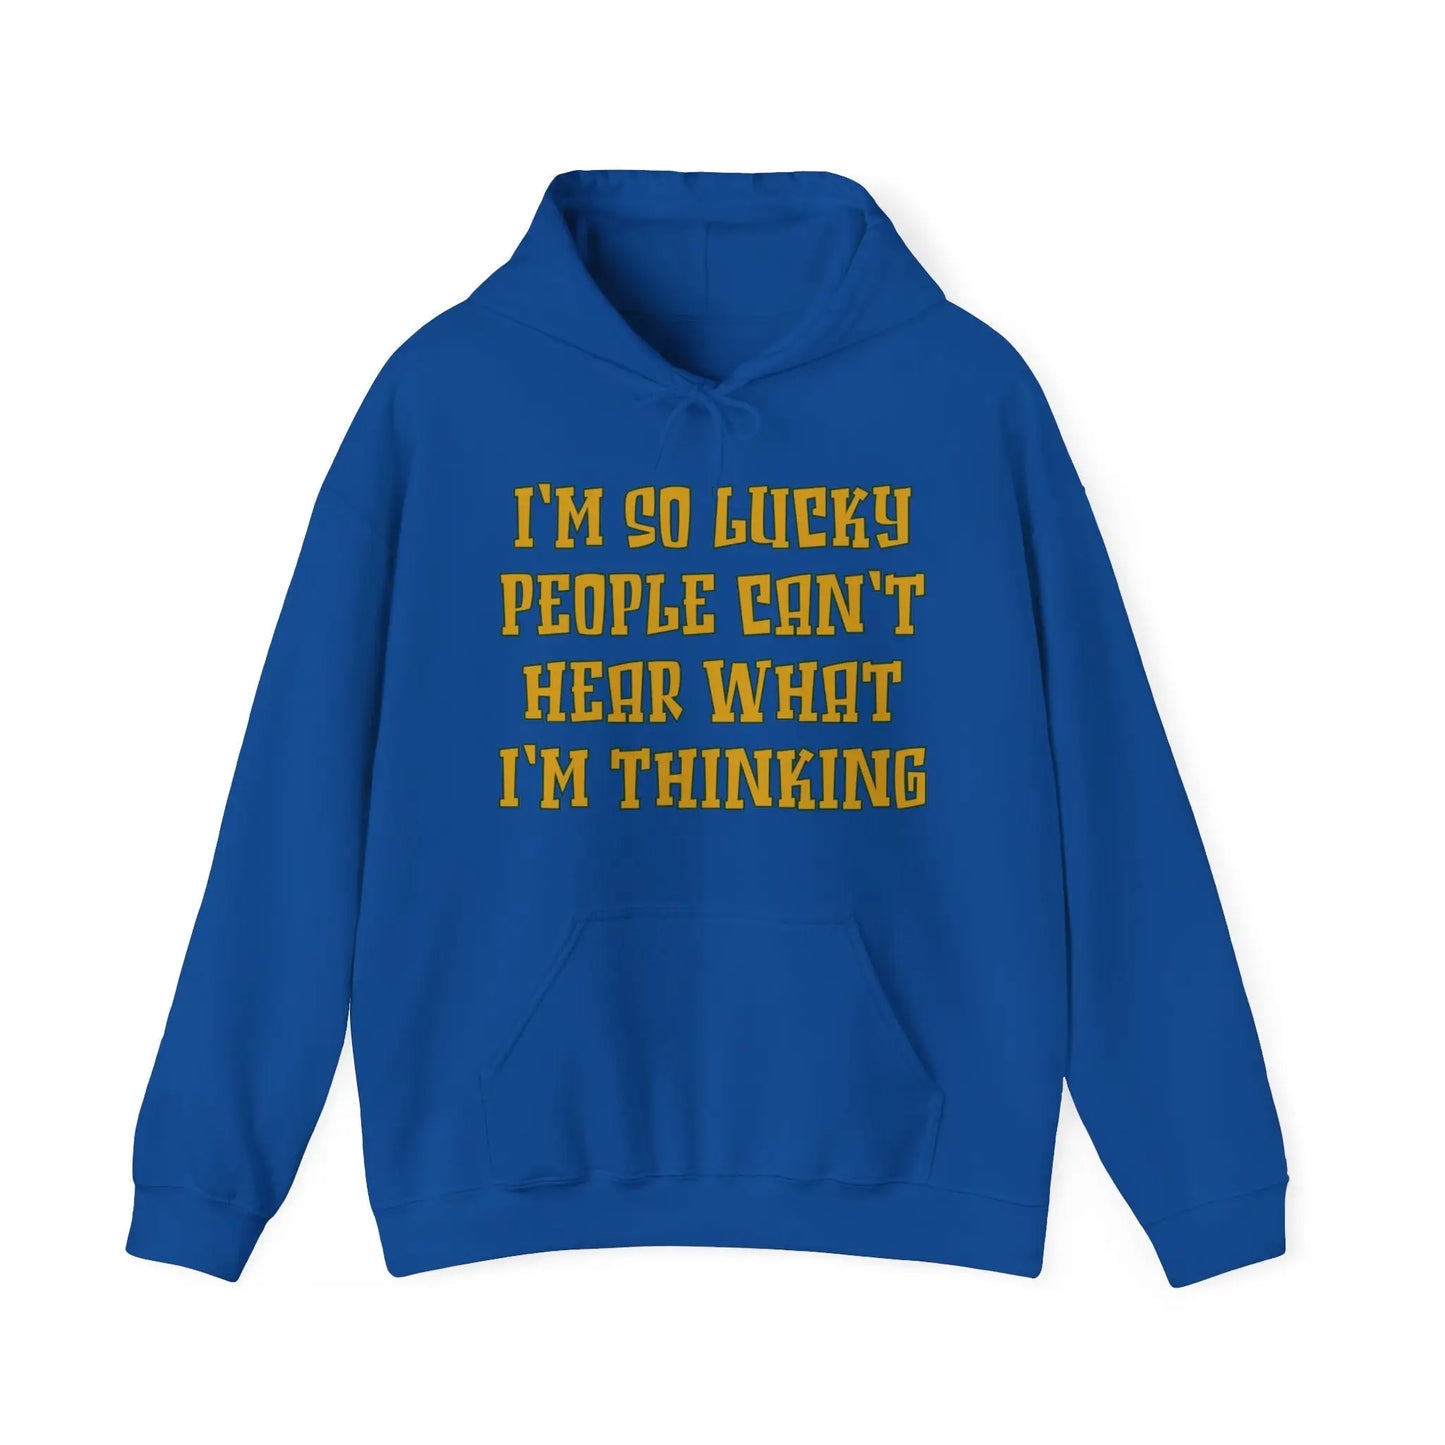 Can't Hear What I'm Thinking Men's Hooded Sweatshirt - Wicked Tees